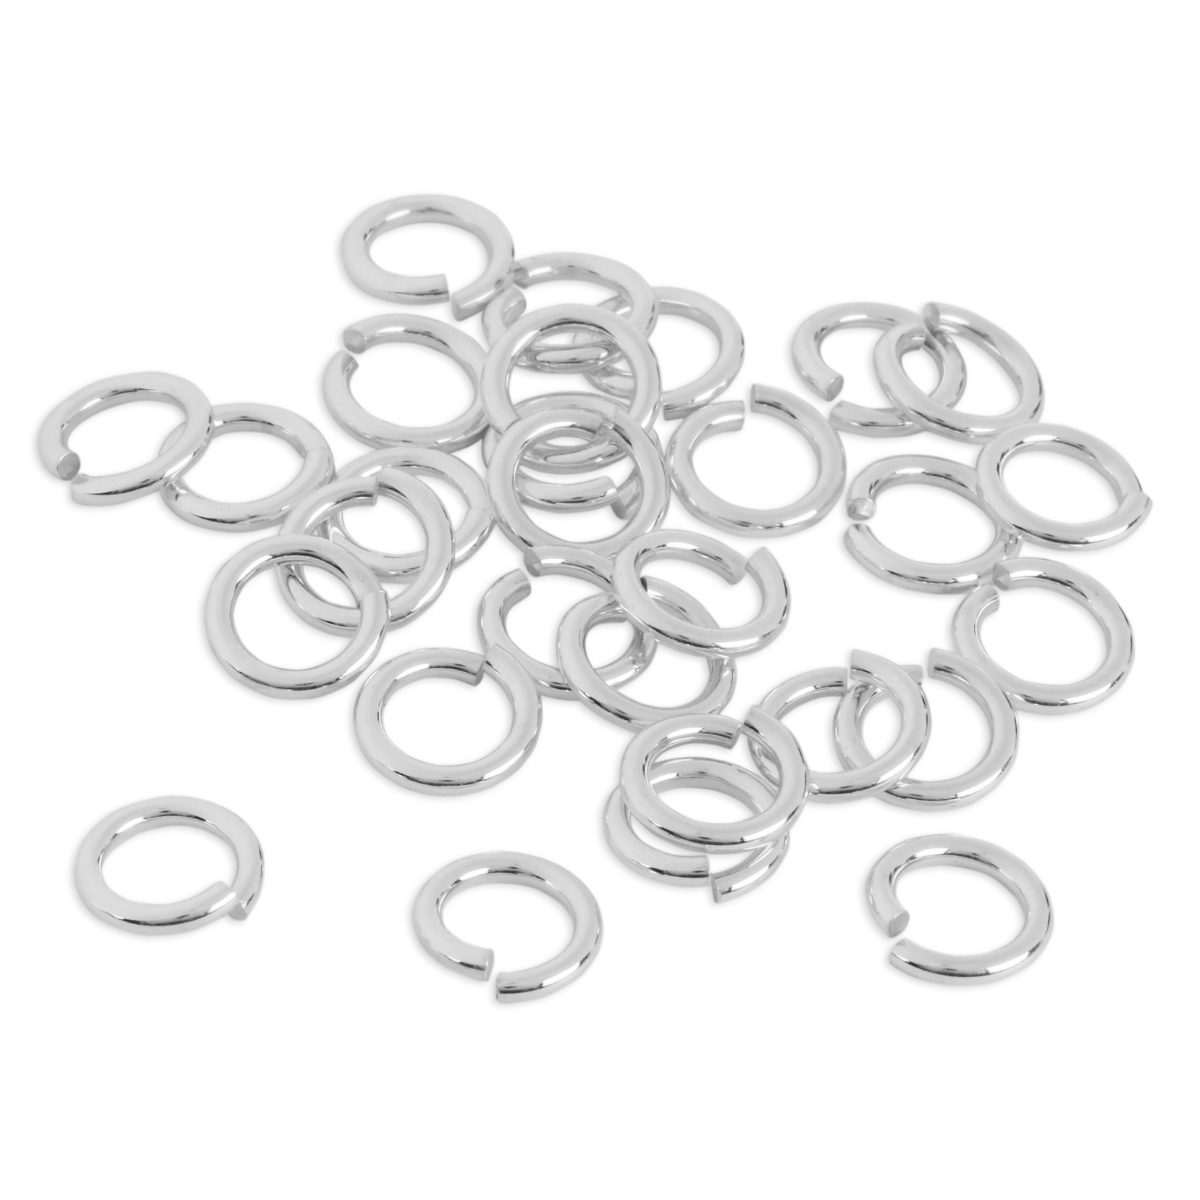 Sterling Silver 4.5mm I.D. 18 Gauge Jump Rings, Pack of 20 – Beaducation